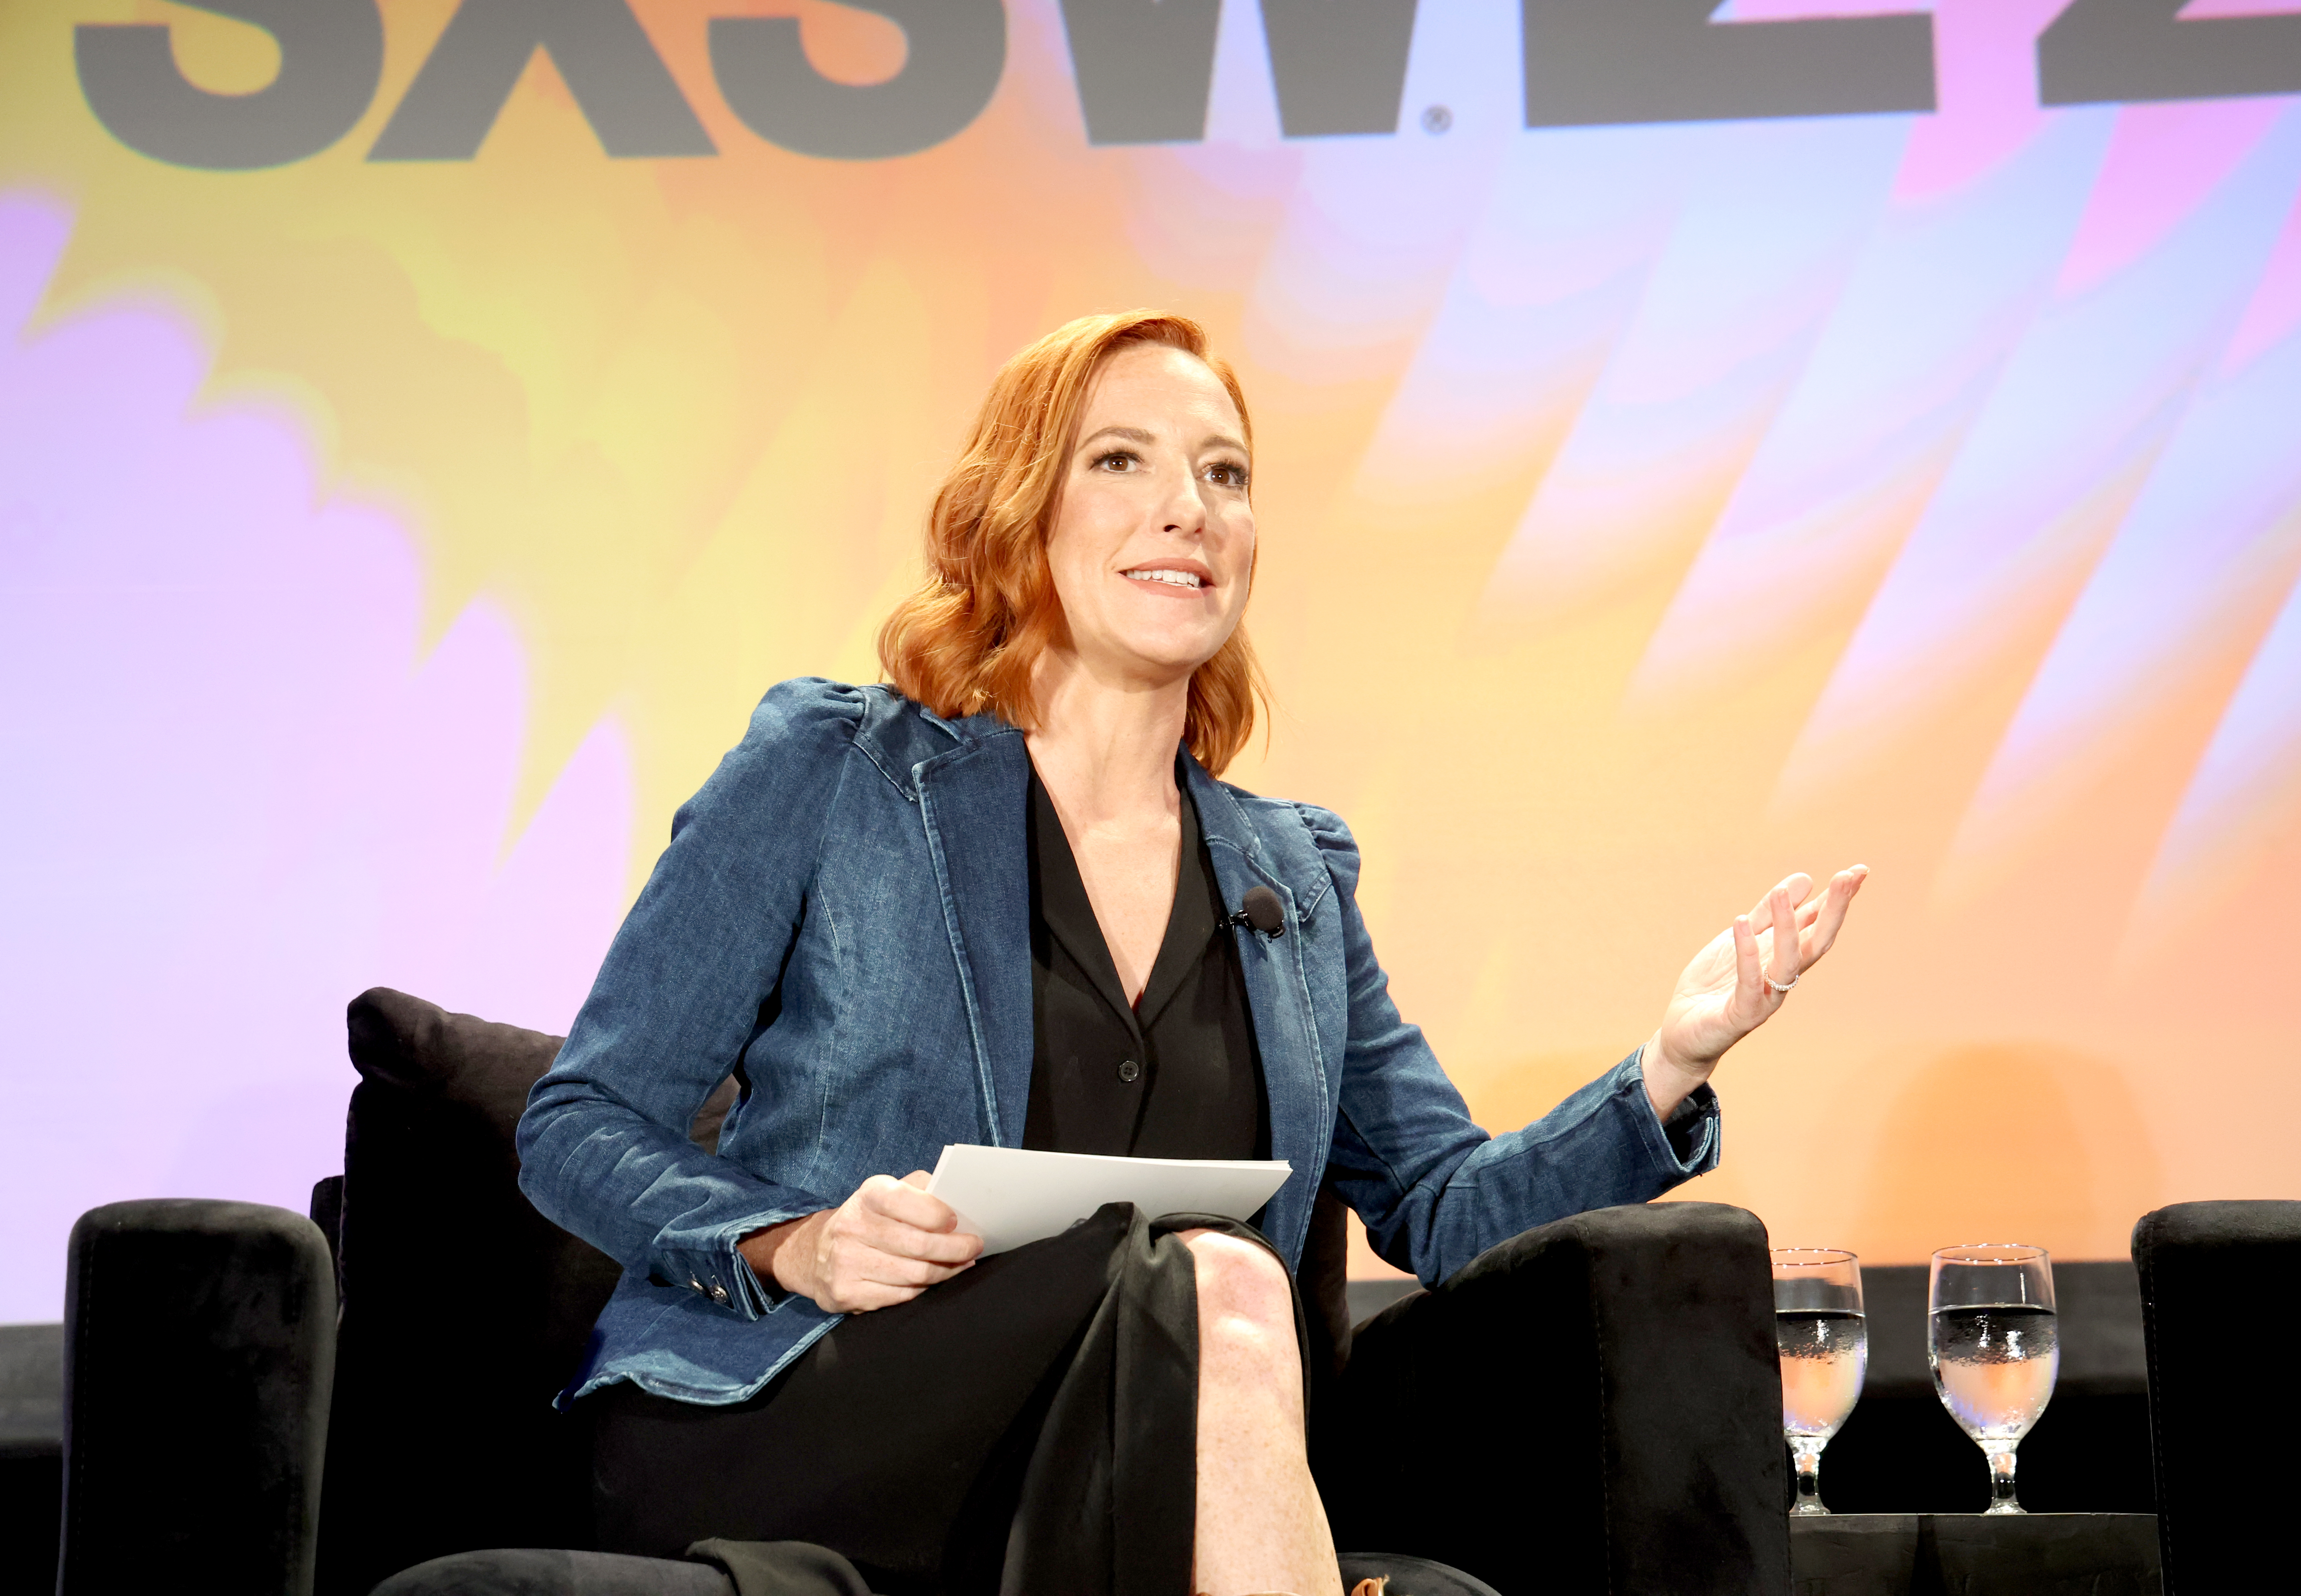 Jen Psaki at the 2023 SXSW Conference And Festival on March 10, 2023, in Austin, Texas. | Source: Getty Images